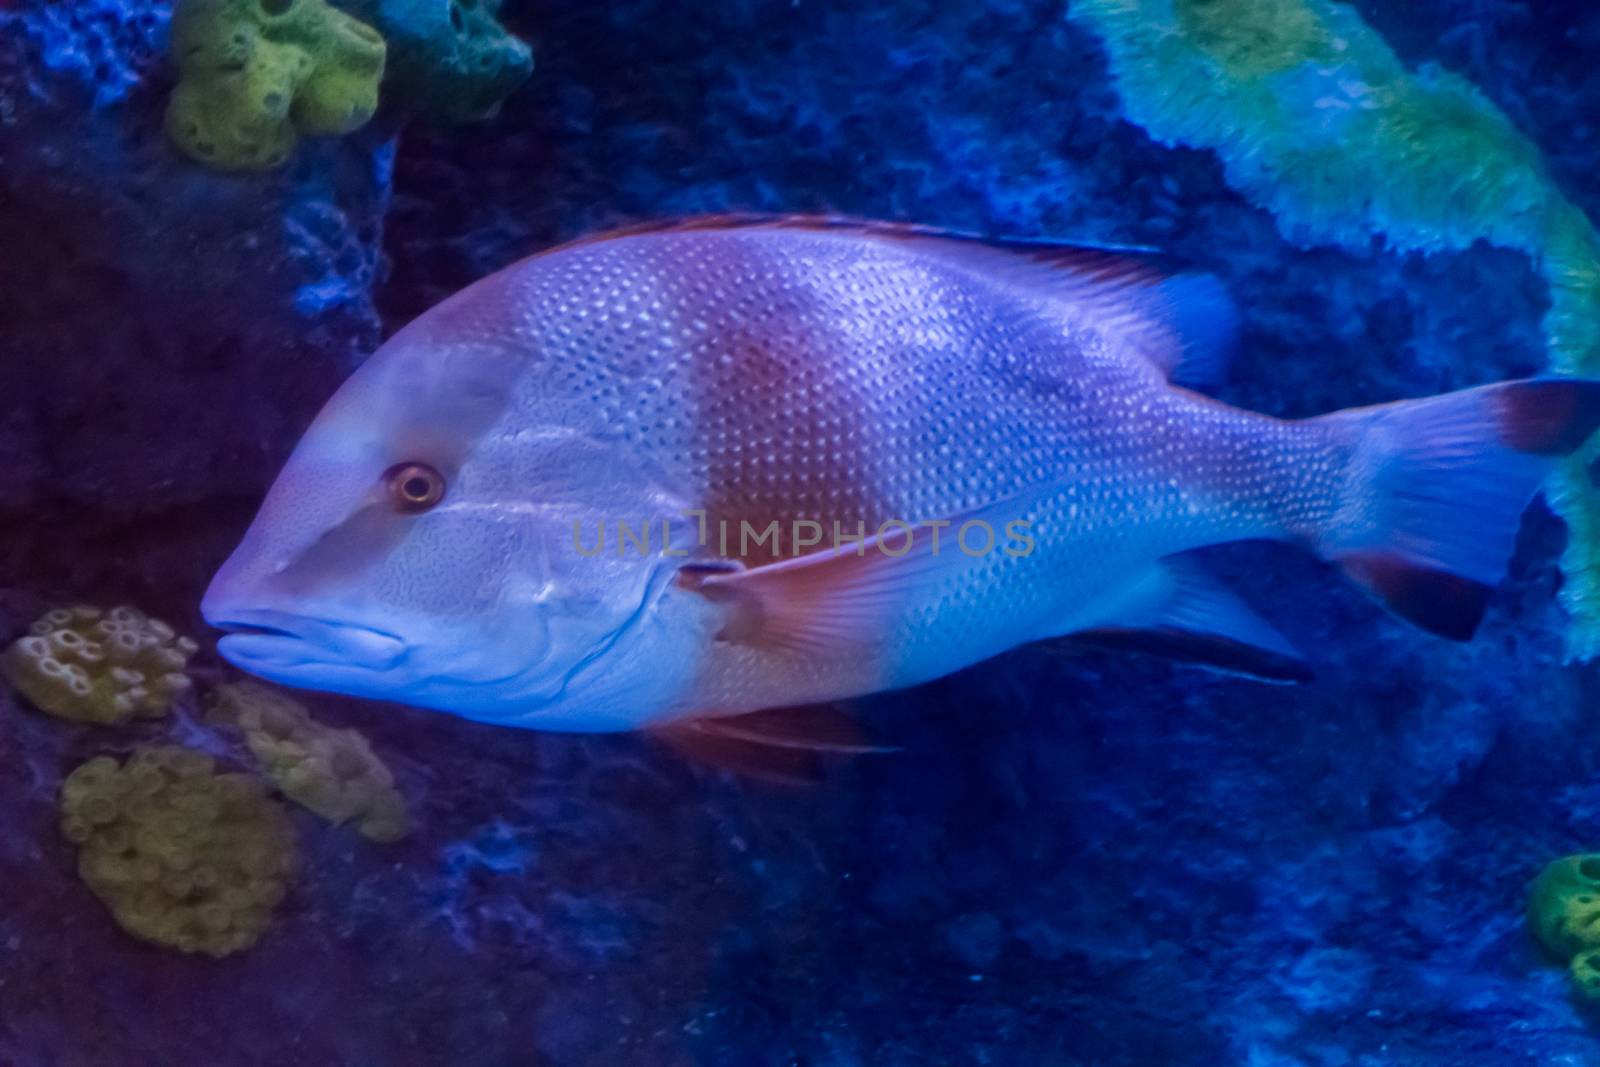 young adult red emperor snapper a tropical aquarium fish from the pacific ocean by charlottebleijenberg